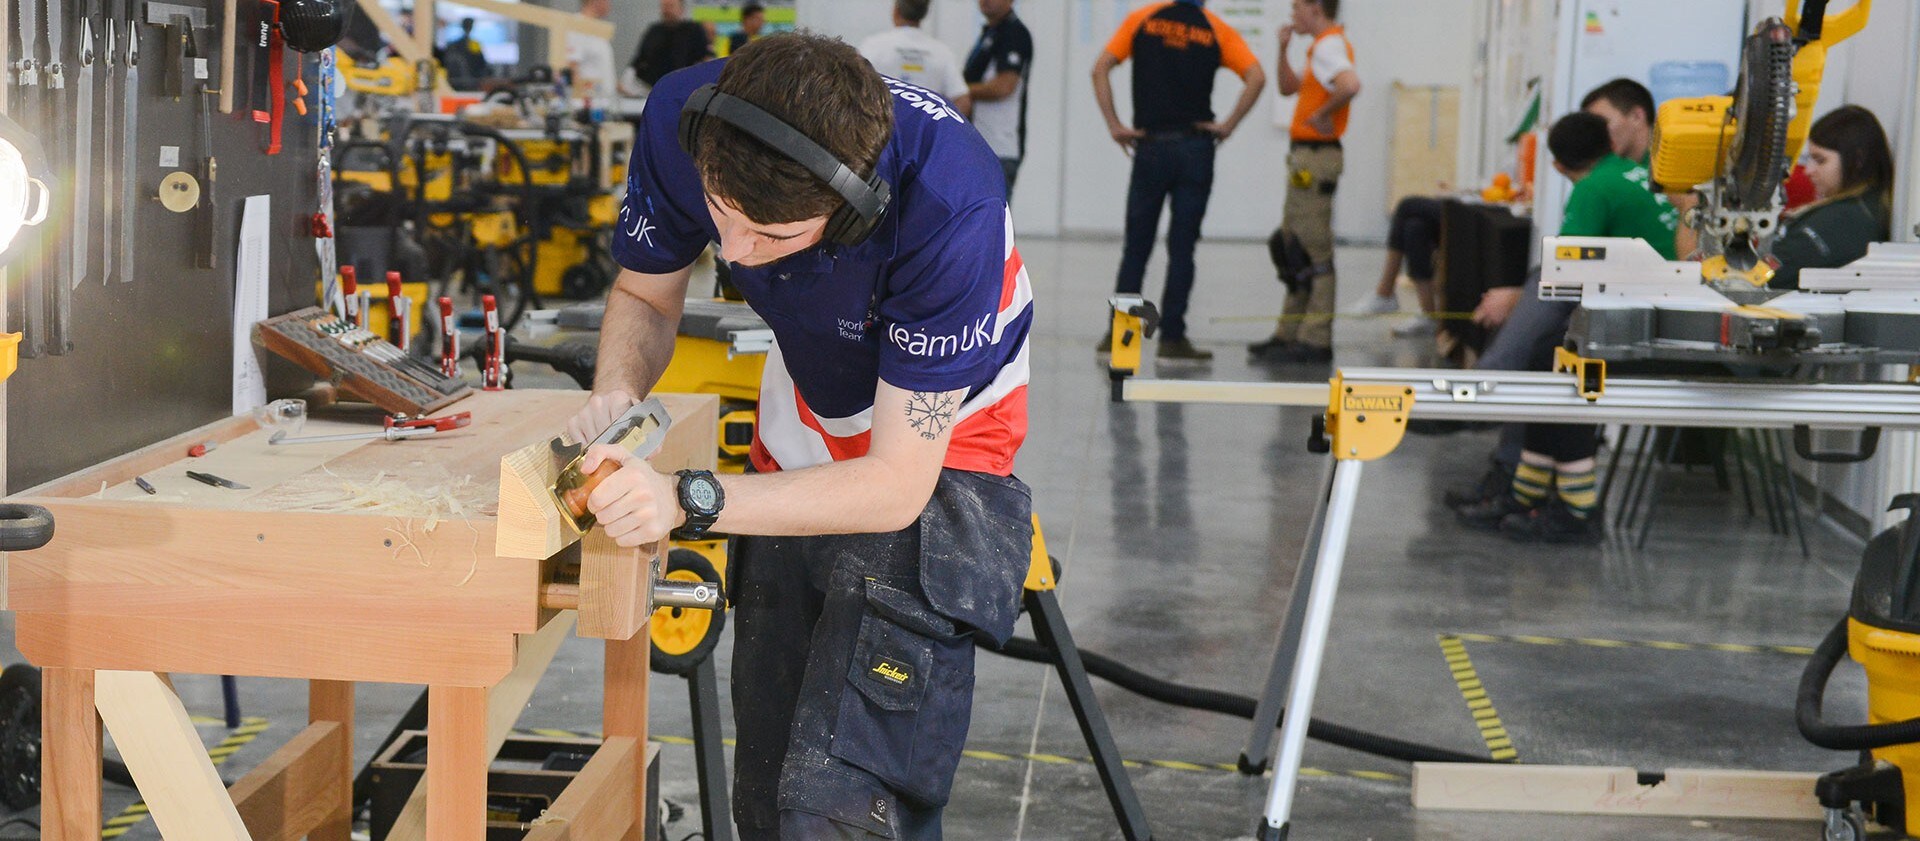 A woodworker participating in a World Skills competition